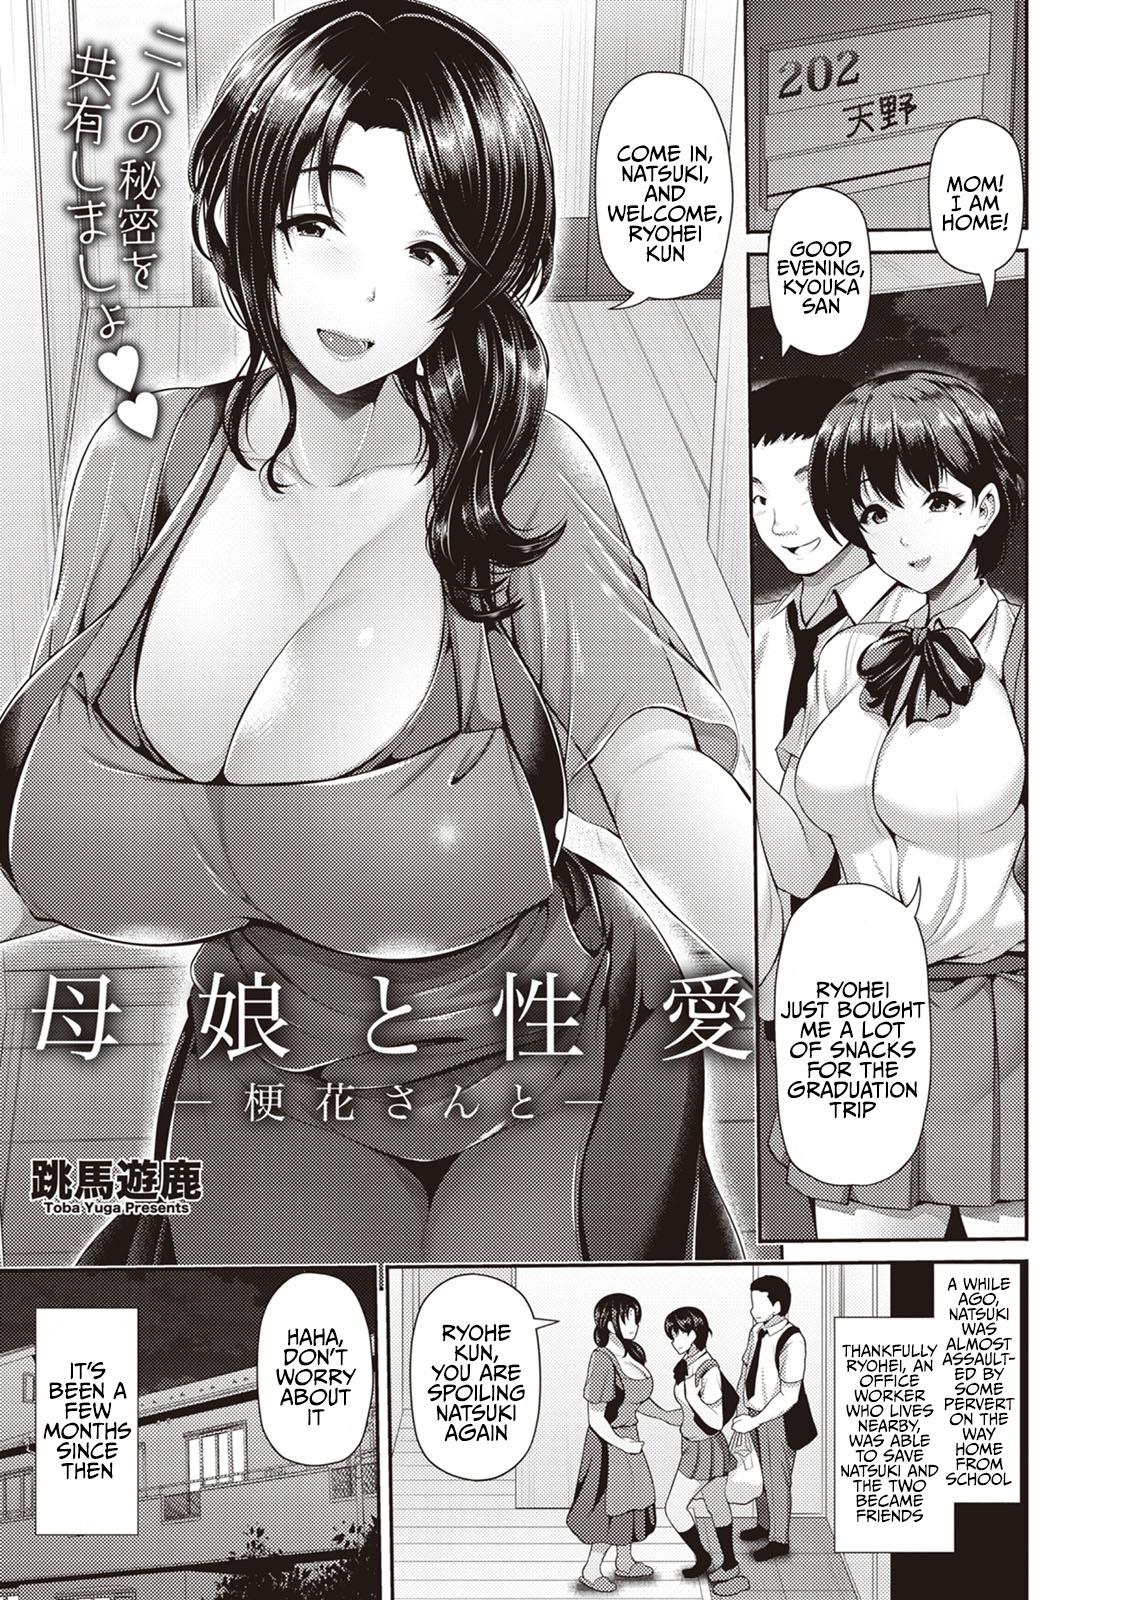 Consolo Oyako to Seiai | Sexual Relations with Mother and Daughter ~ Kyouka San Teamskeet - Page 2